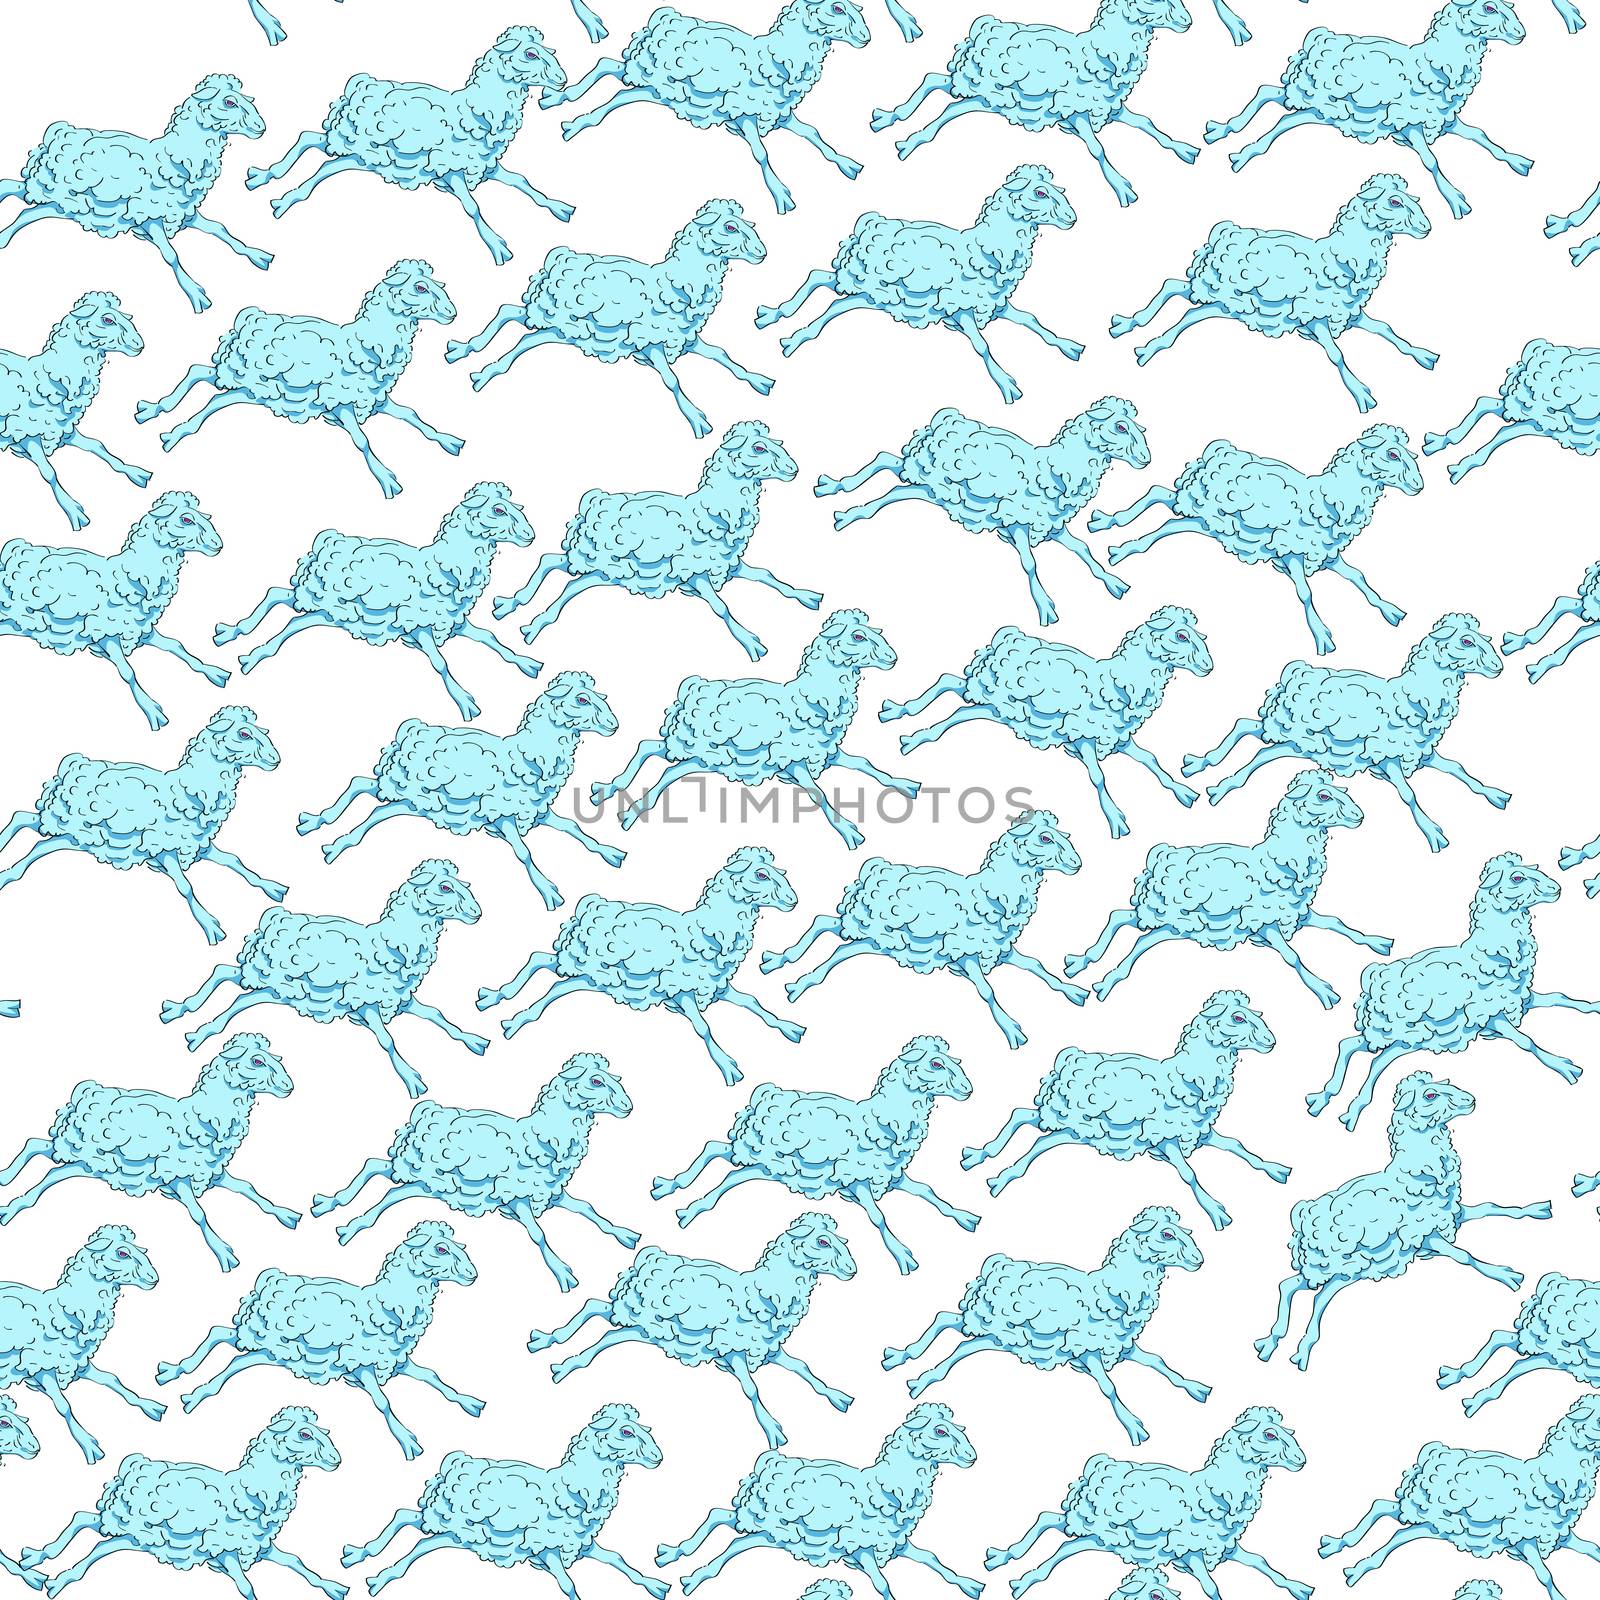 Seamless pattern with the same blue sheep in different positions, doodle illustration over white